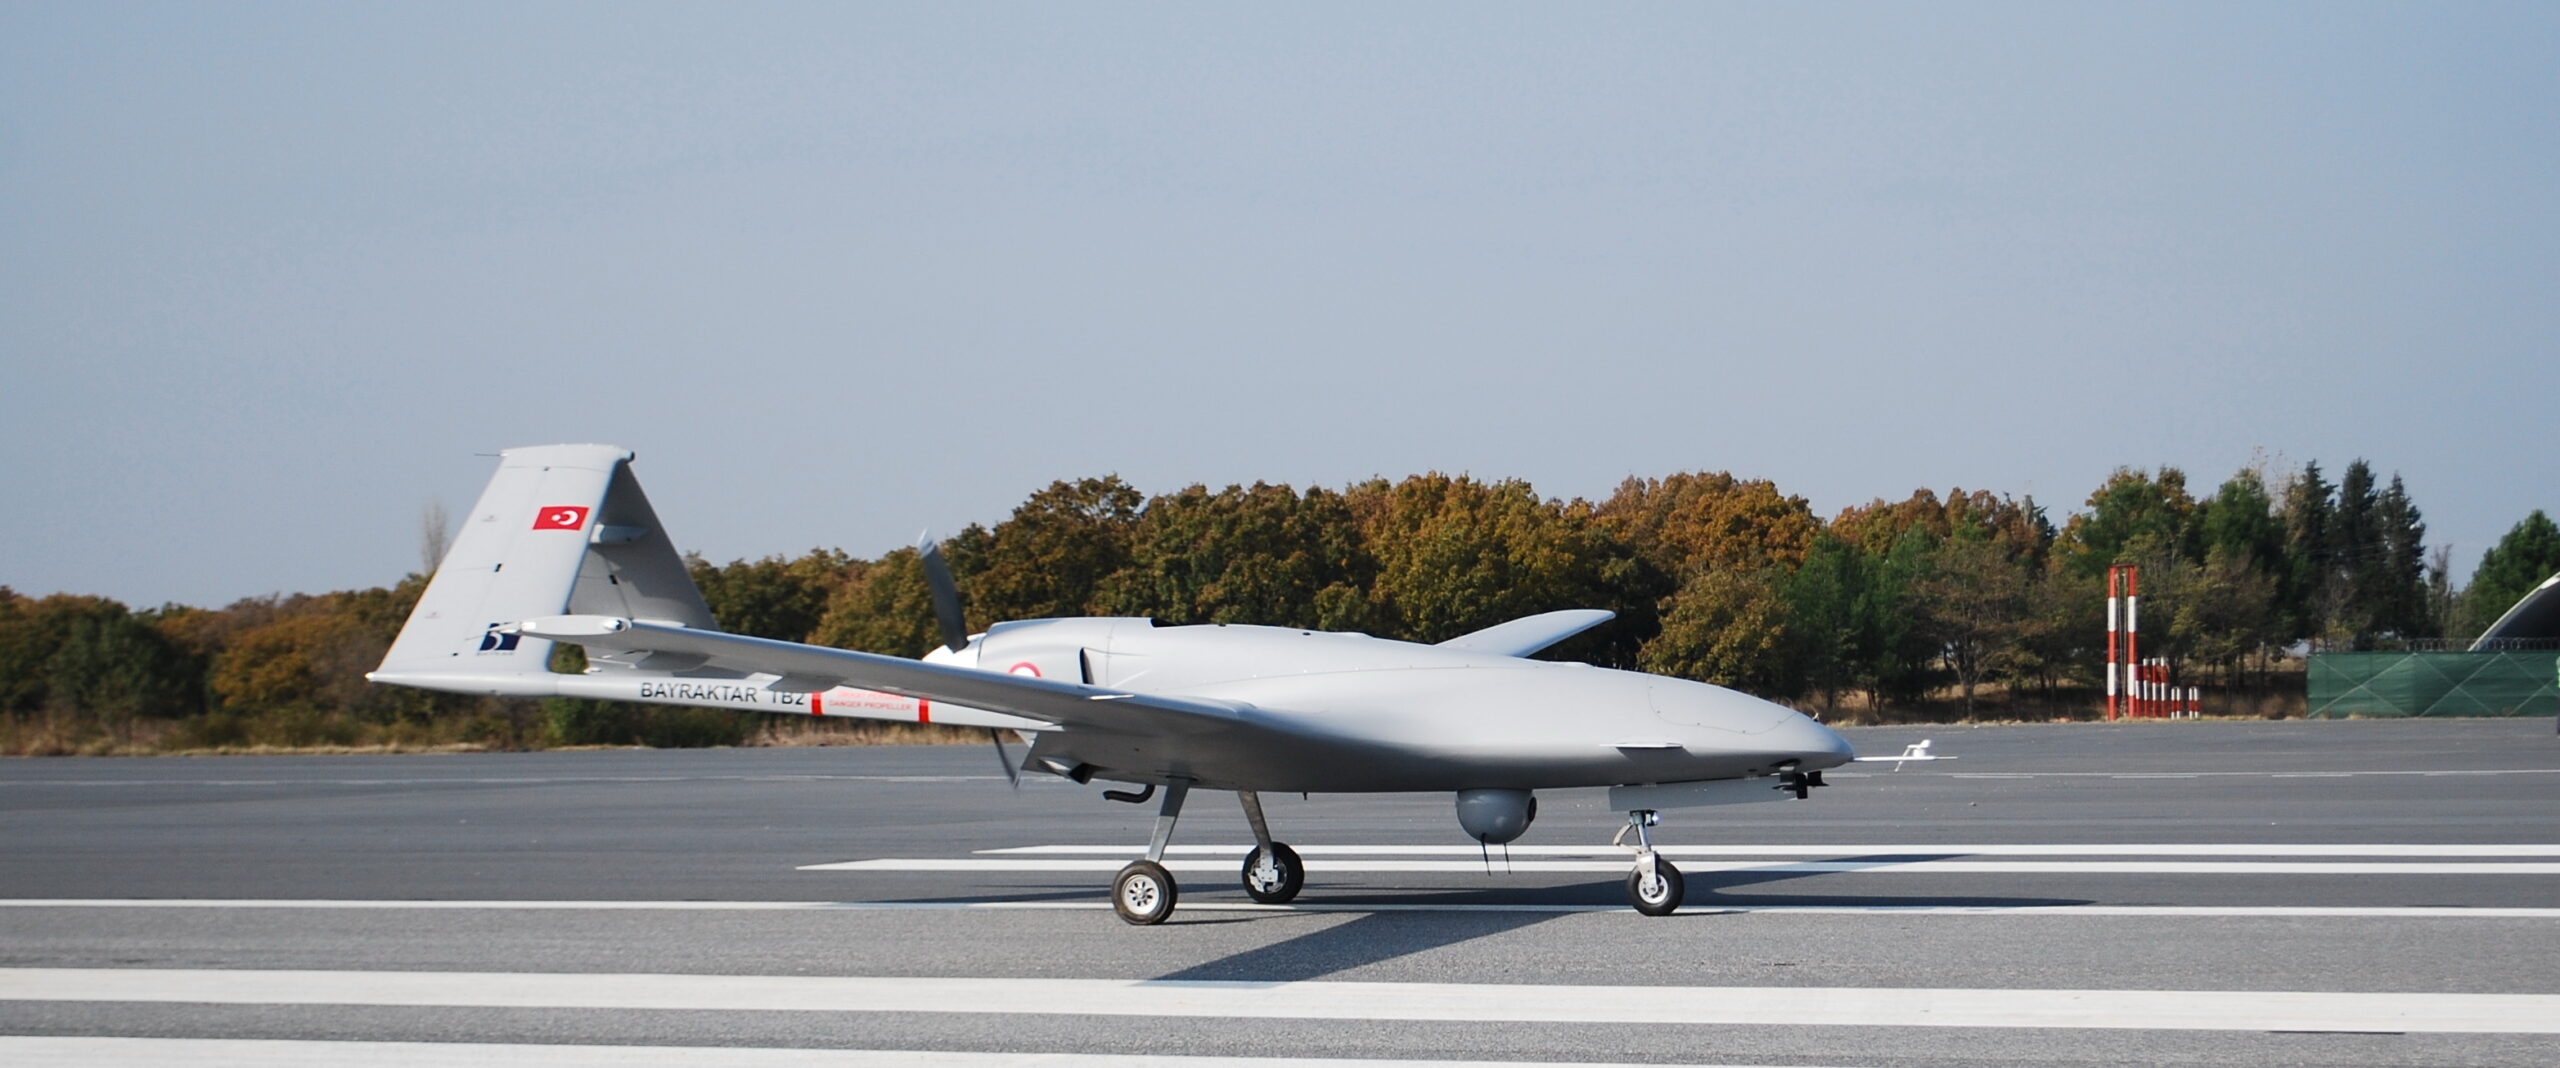 After the war over Nagorno-Karabakh: British military flirts with Turkish-style armed drones